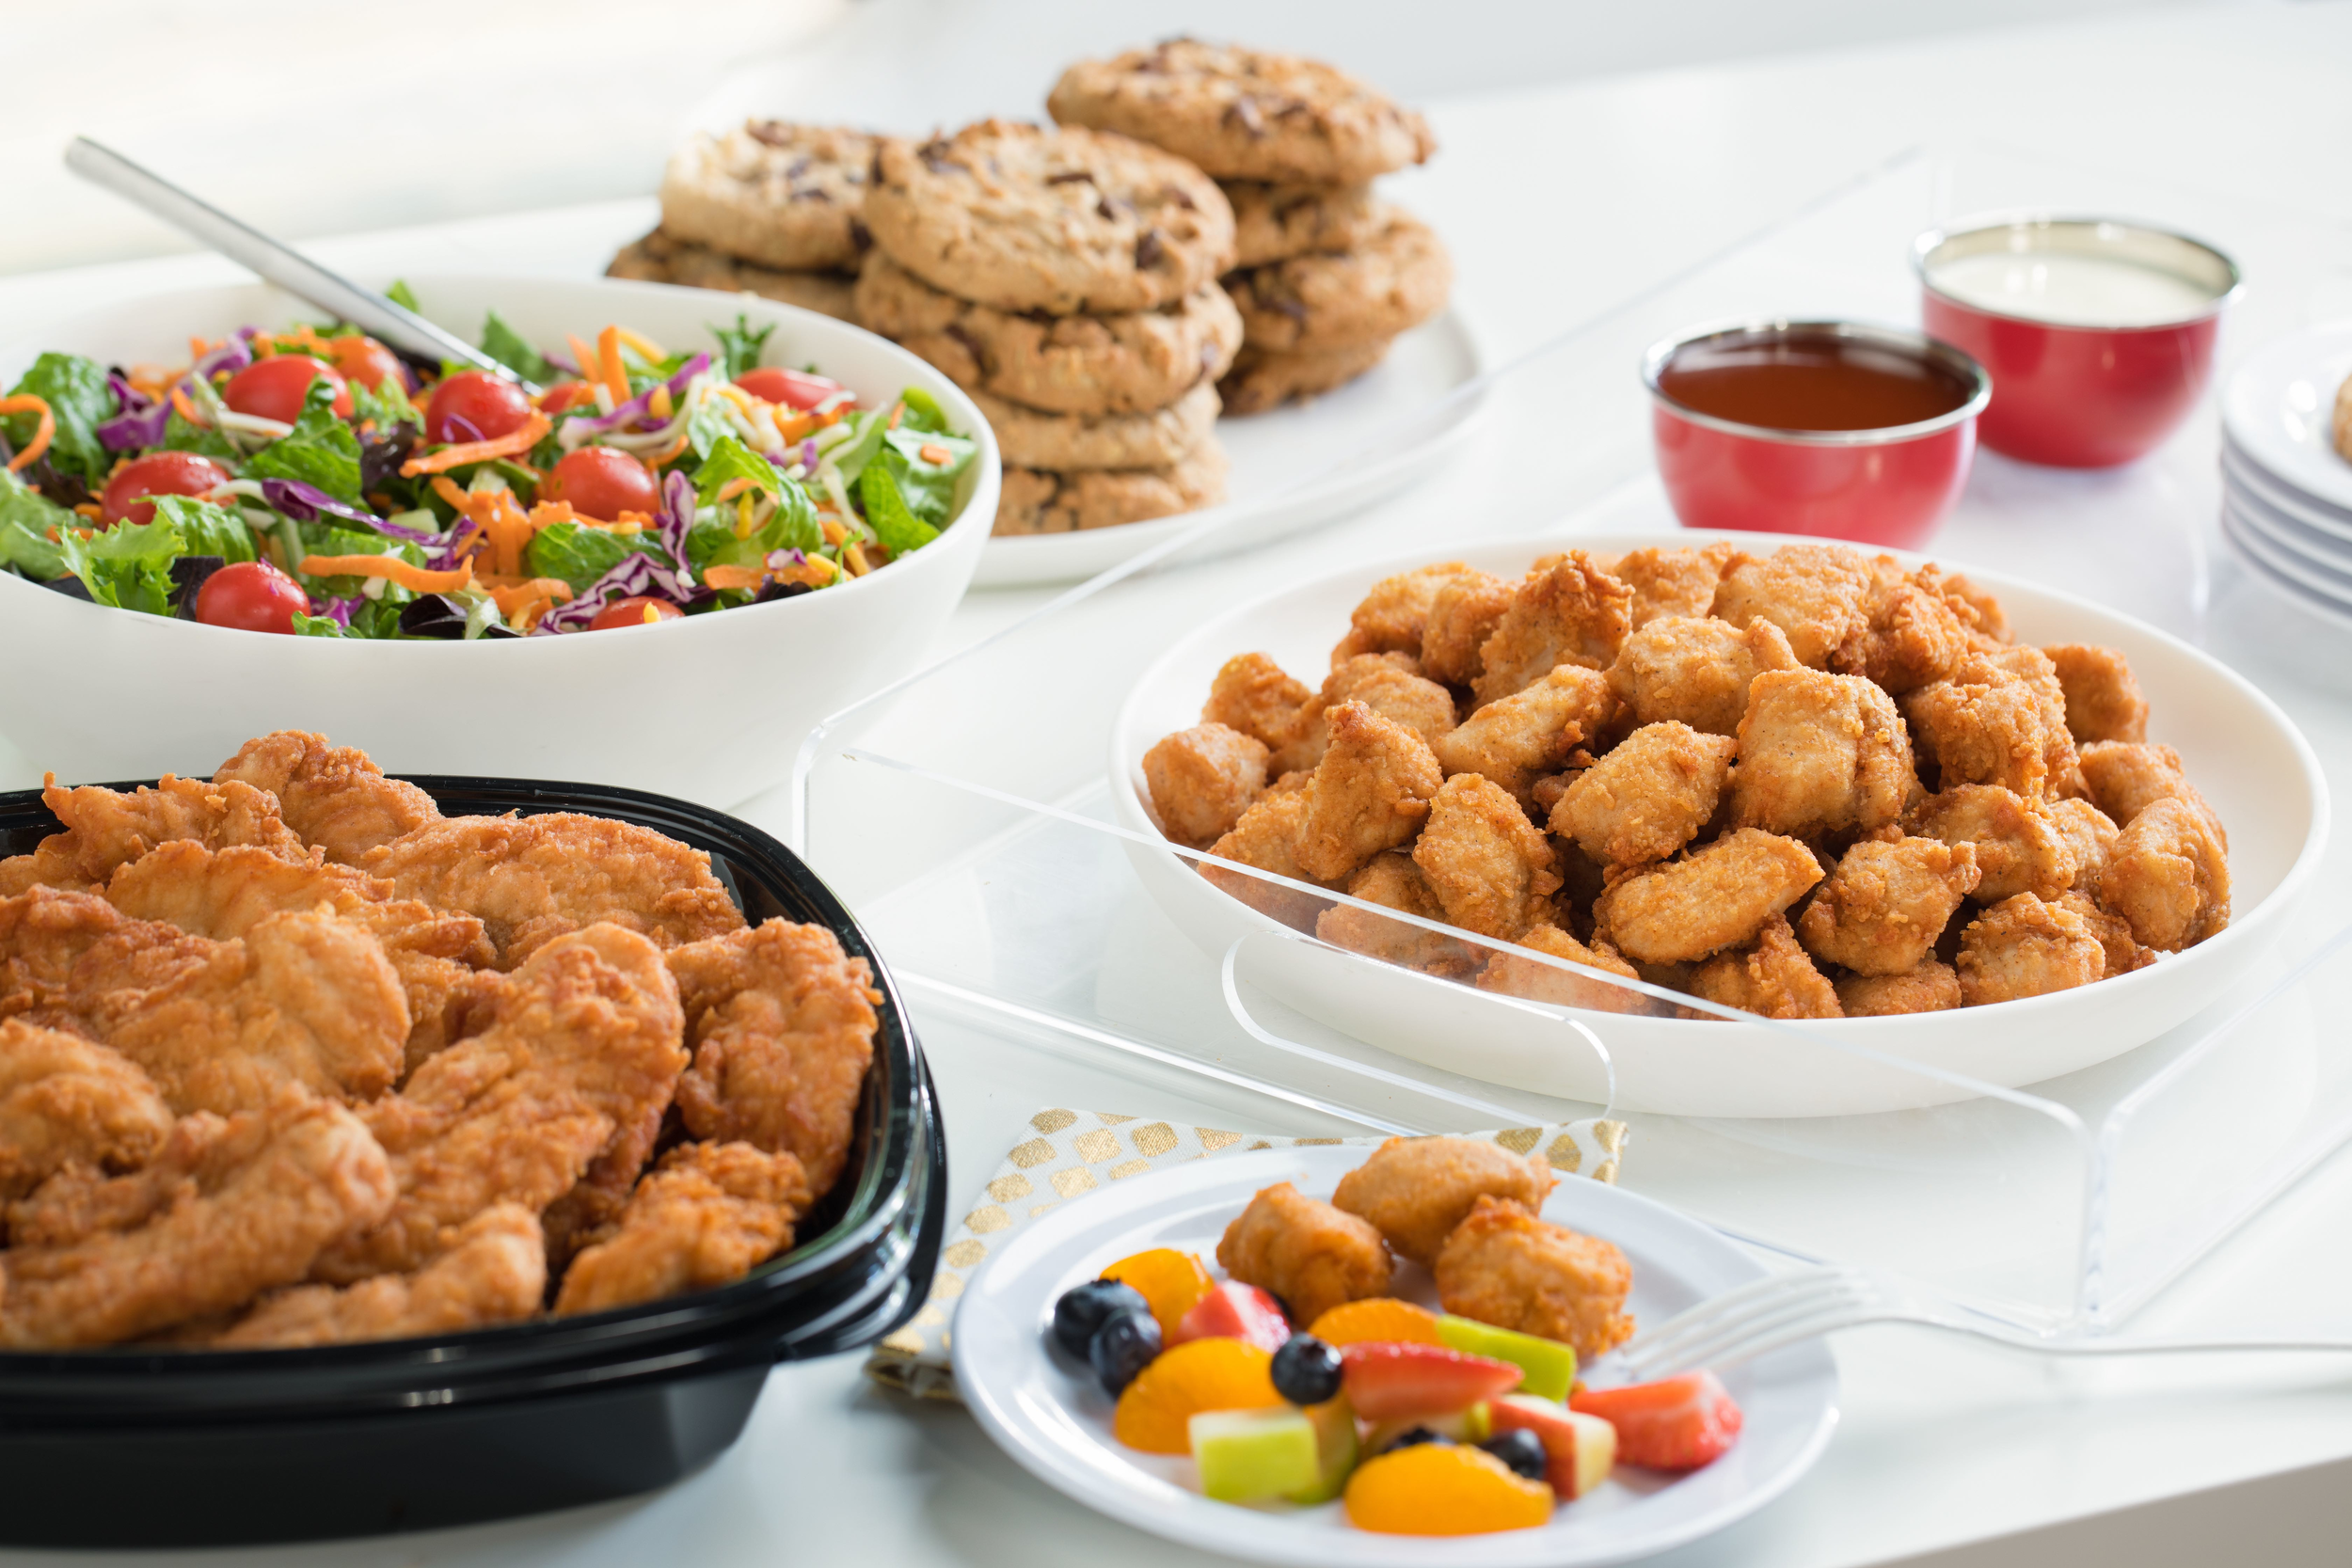 Chick-fil-A strips, nuggets, salad and cookies in serving bowls